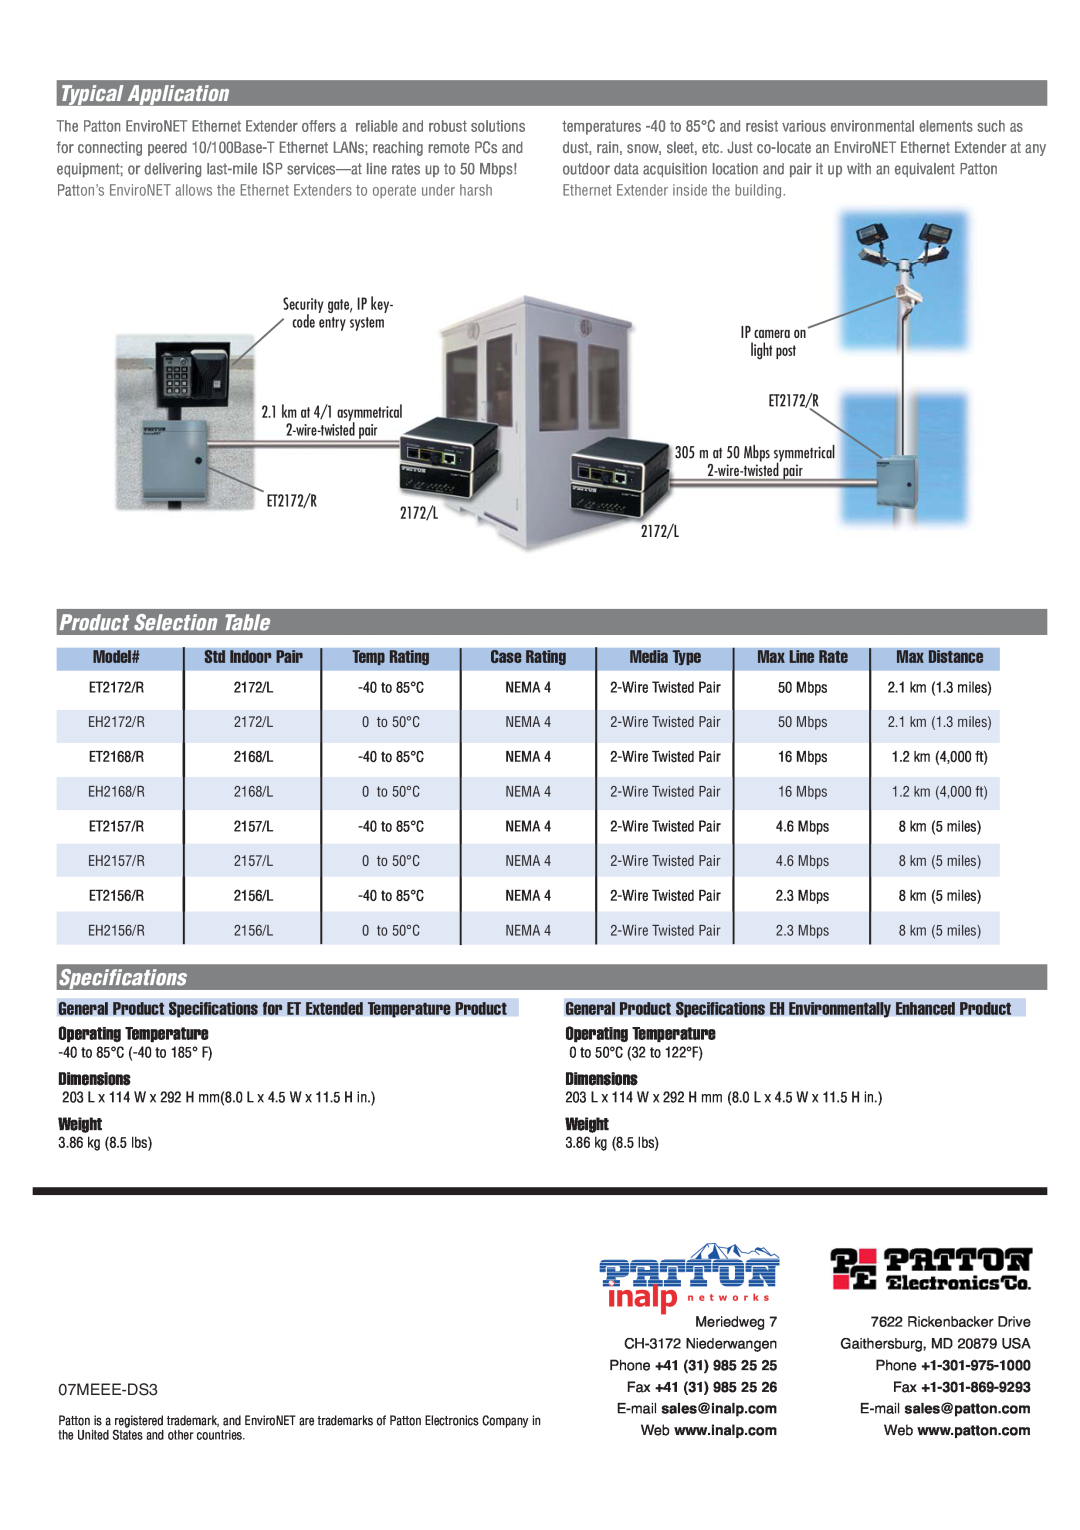 Patton electronic Ethernet Extenders manual Typical Application, Product Selection Table, Specifications, ET2172/R 2172/L 